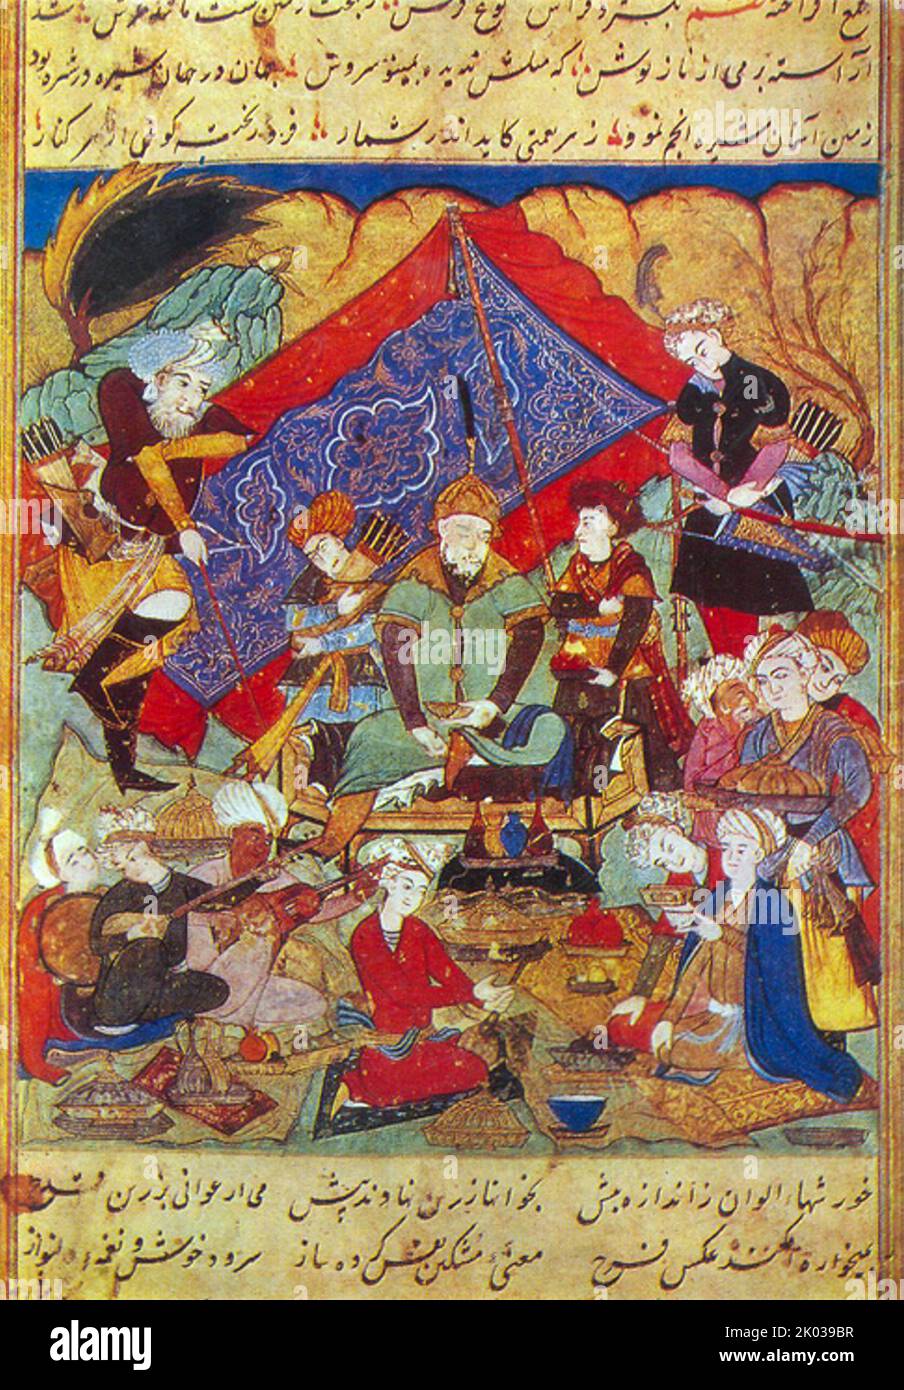 Timur feasts in the environs of Samarkand. Timur (1336 - 1405), later Timur Gurkan a Turco-Mongol conqueror who founded the Timurid Empire in and around modern-day Afghanistan, Iran and Central Asia, becoming the first ruler of the Timurid dynasty. As an undefeated commander, he is widely regarded as one of the greatest military lead+E18ers and tacticians in history. Stock Photo